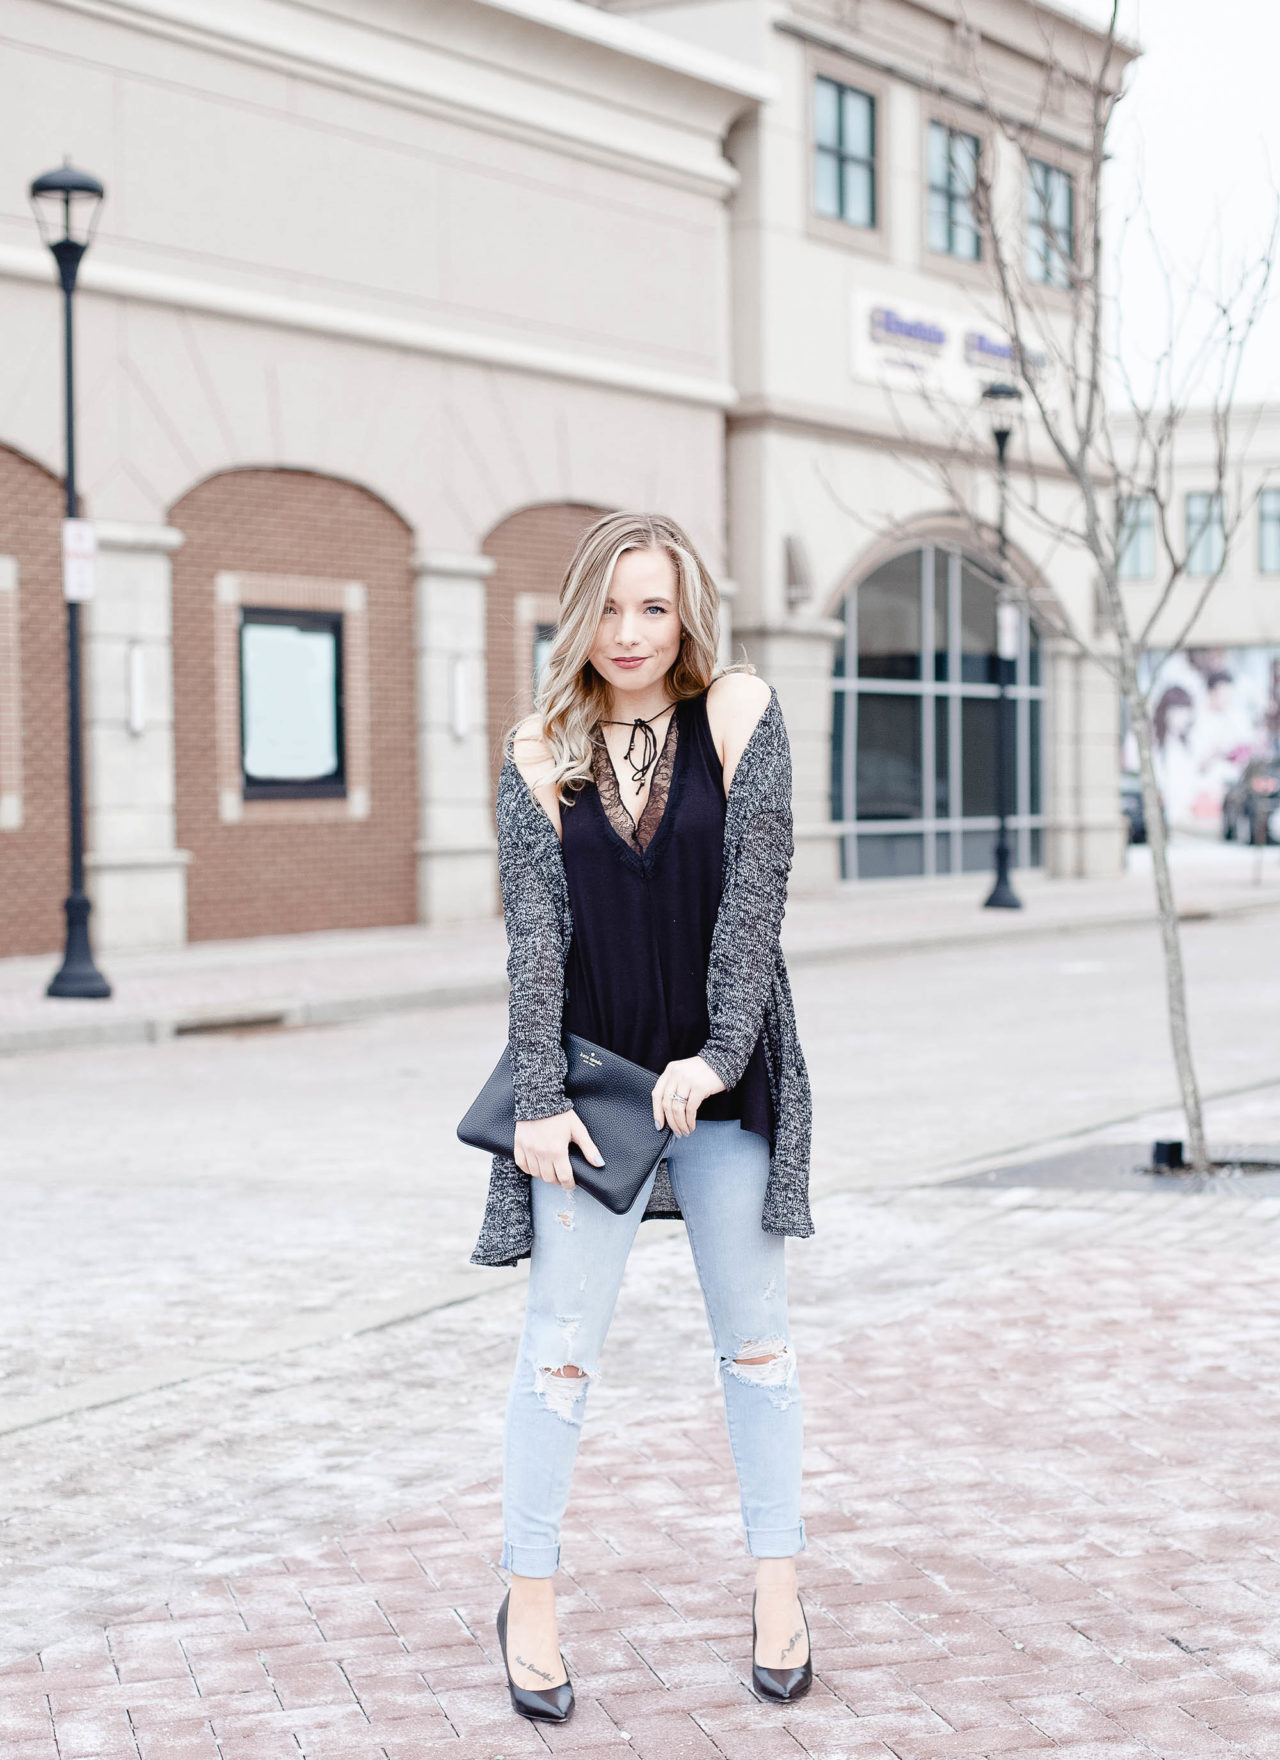 Edgy & Sassy Valentine’s Day Outfit